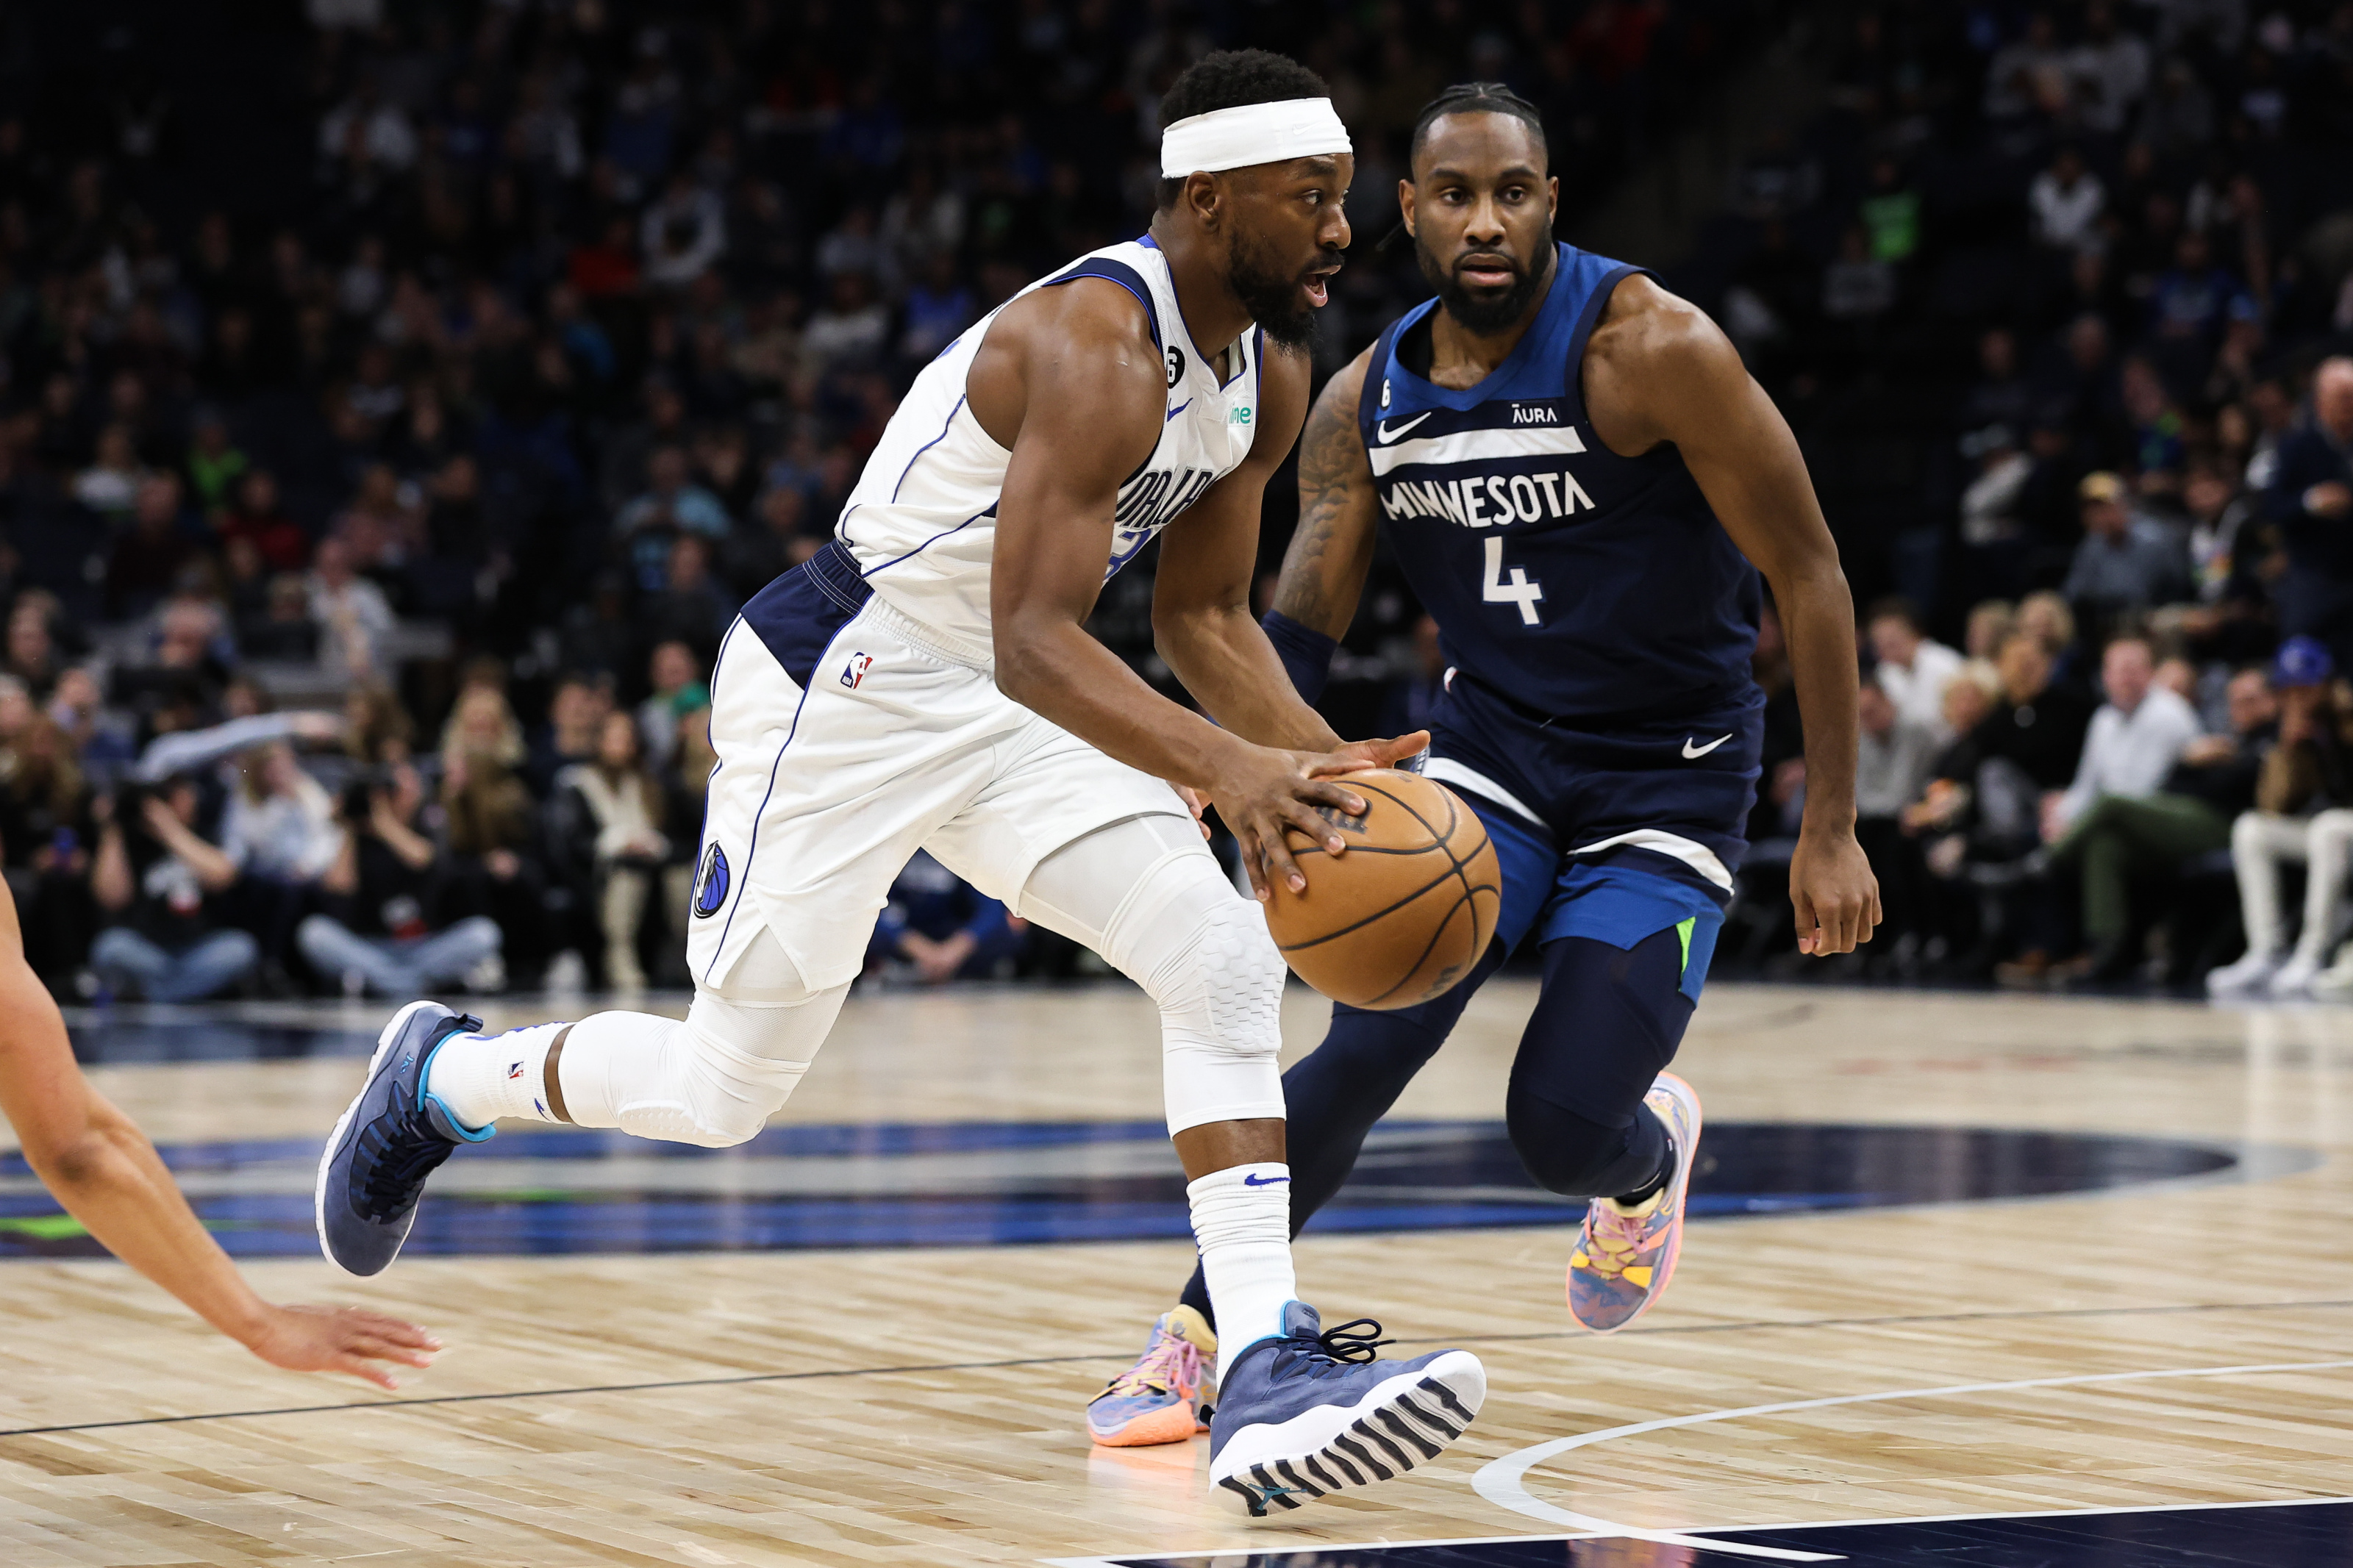 Kemba Walker has knee drained, will miss game vs. Wolves